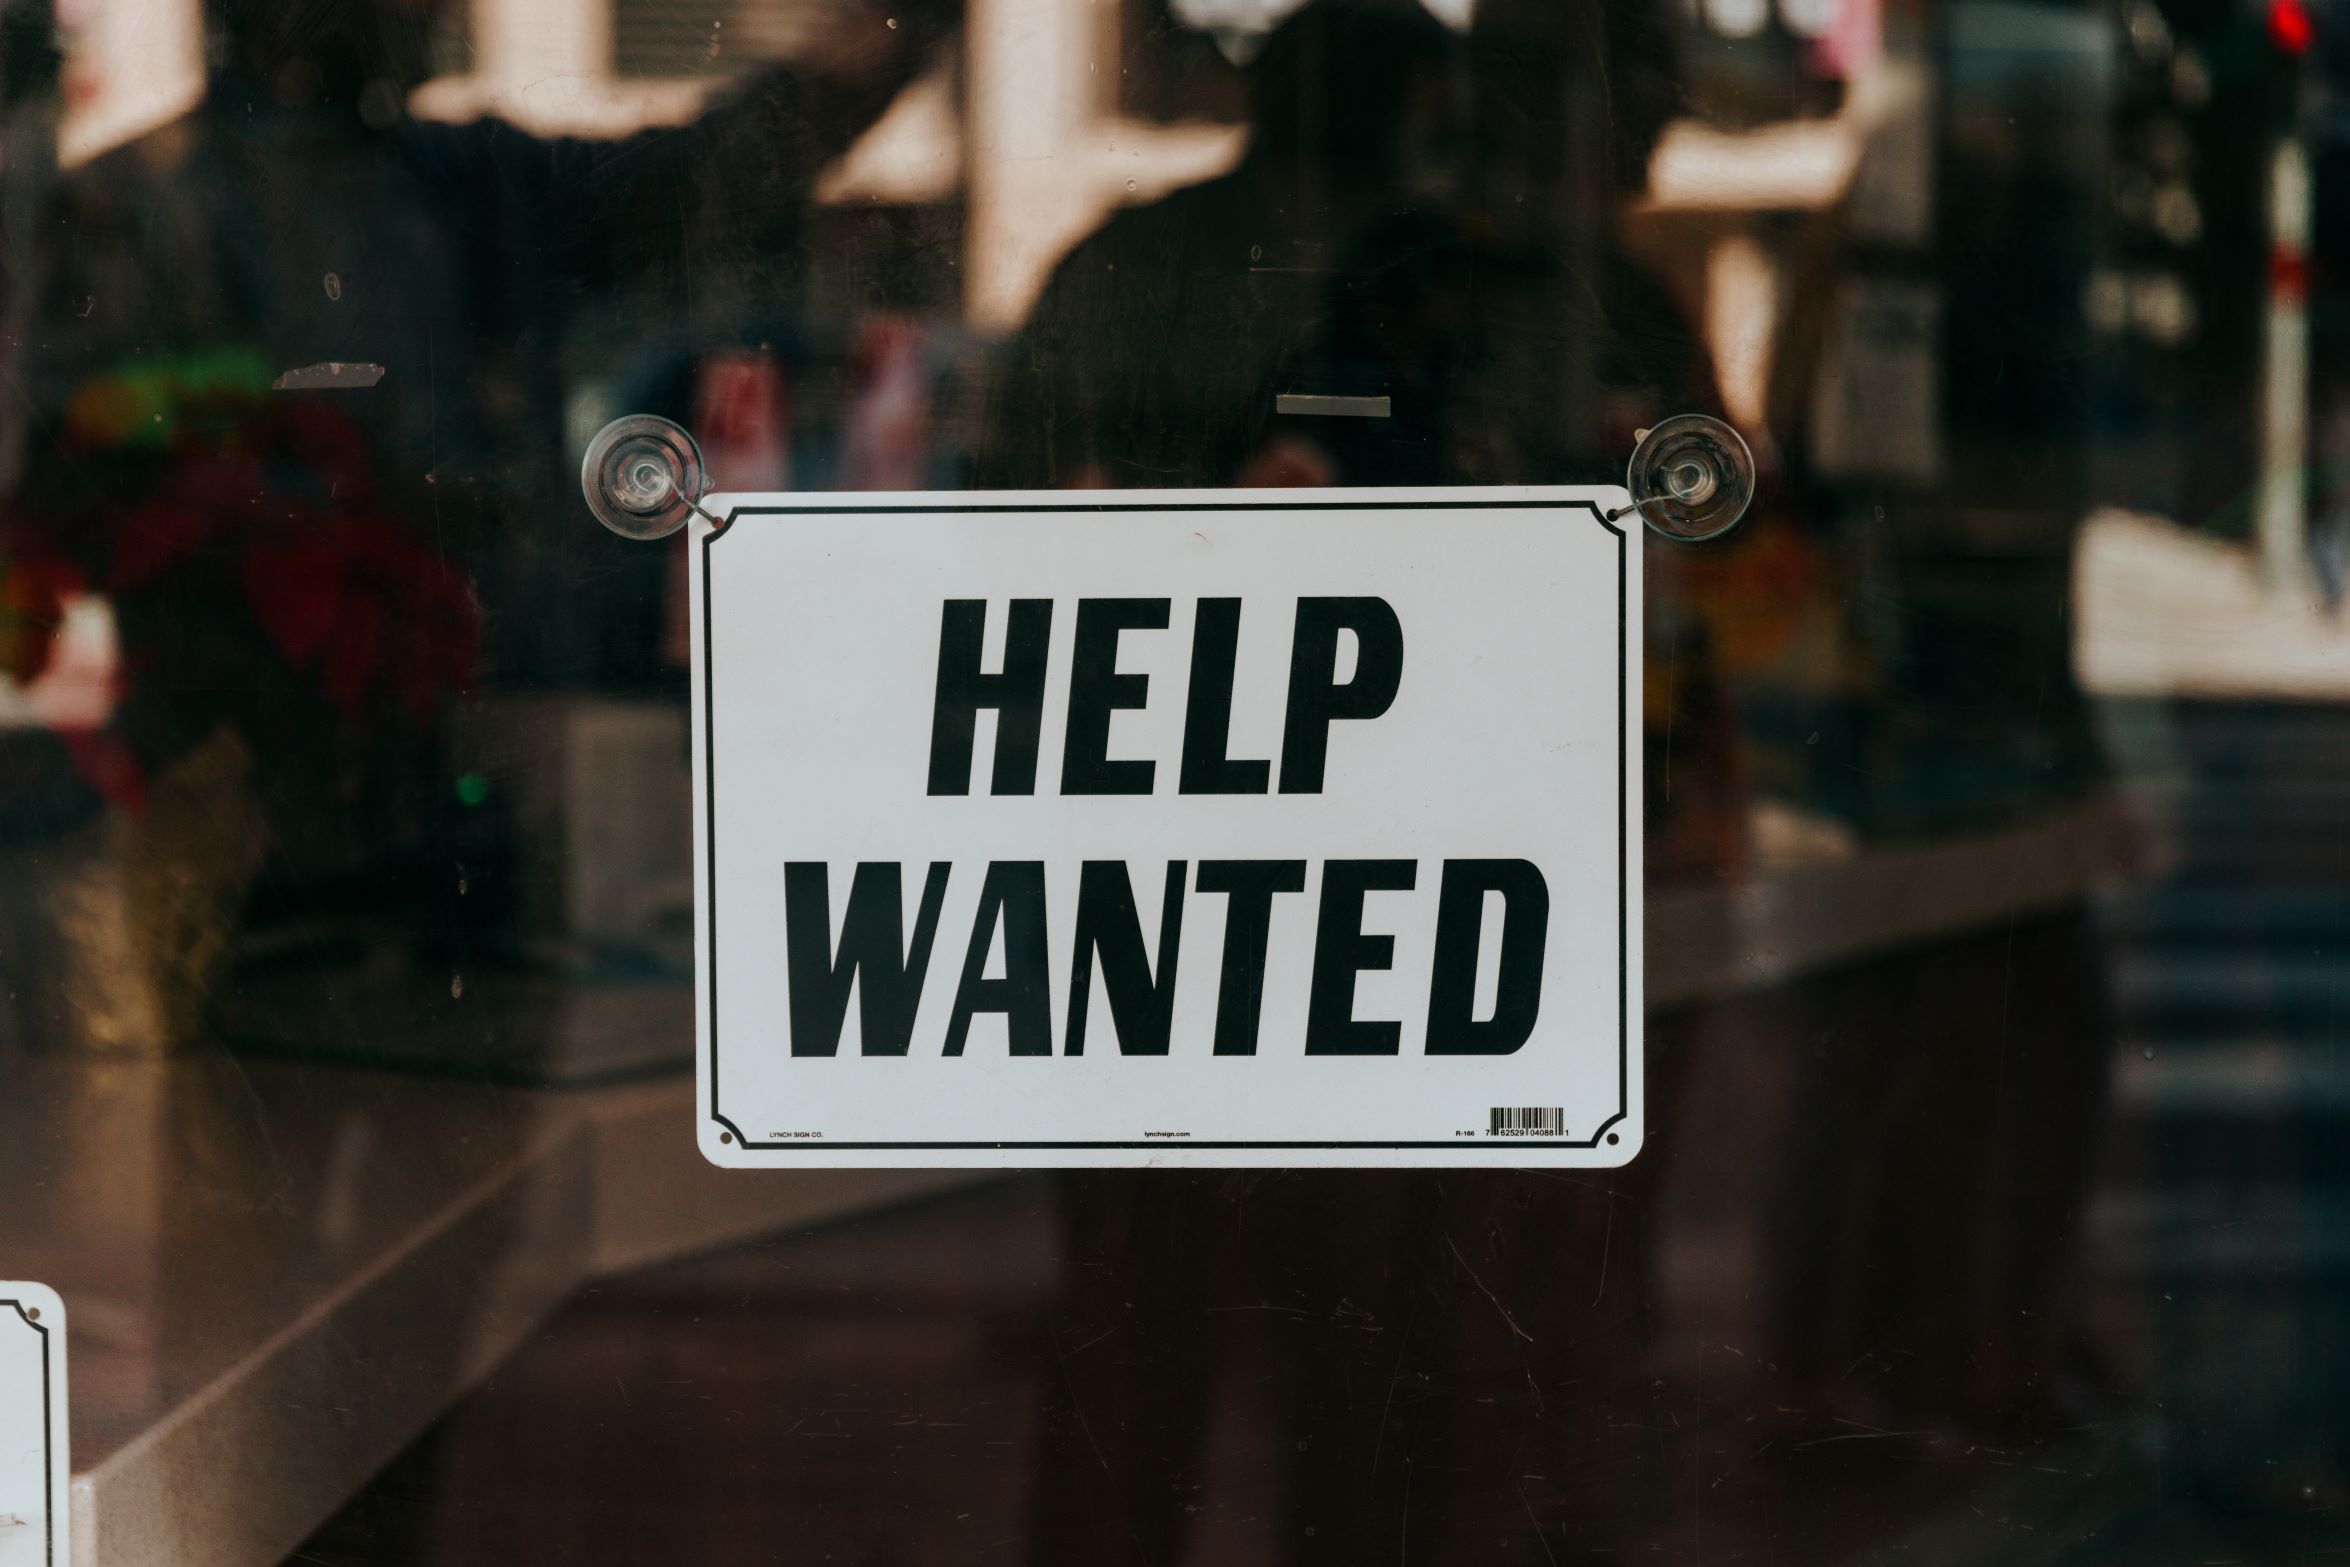 An image of a help wanted sign in a store window.